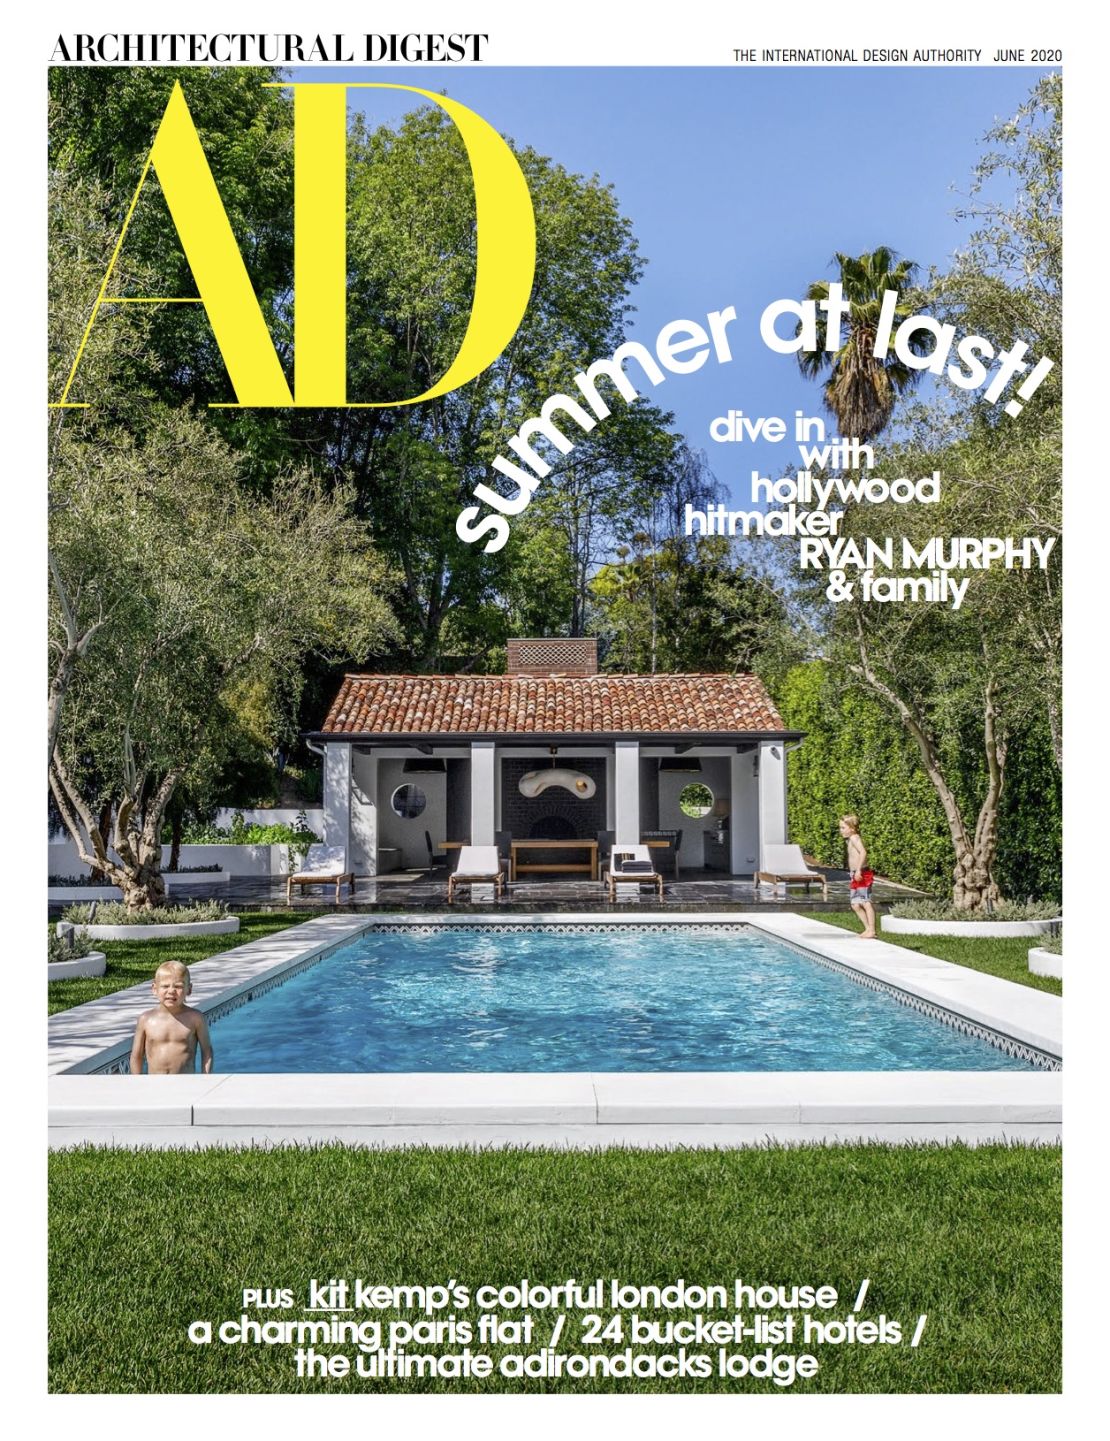 Architectural Digest June cover.